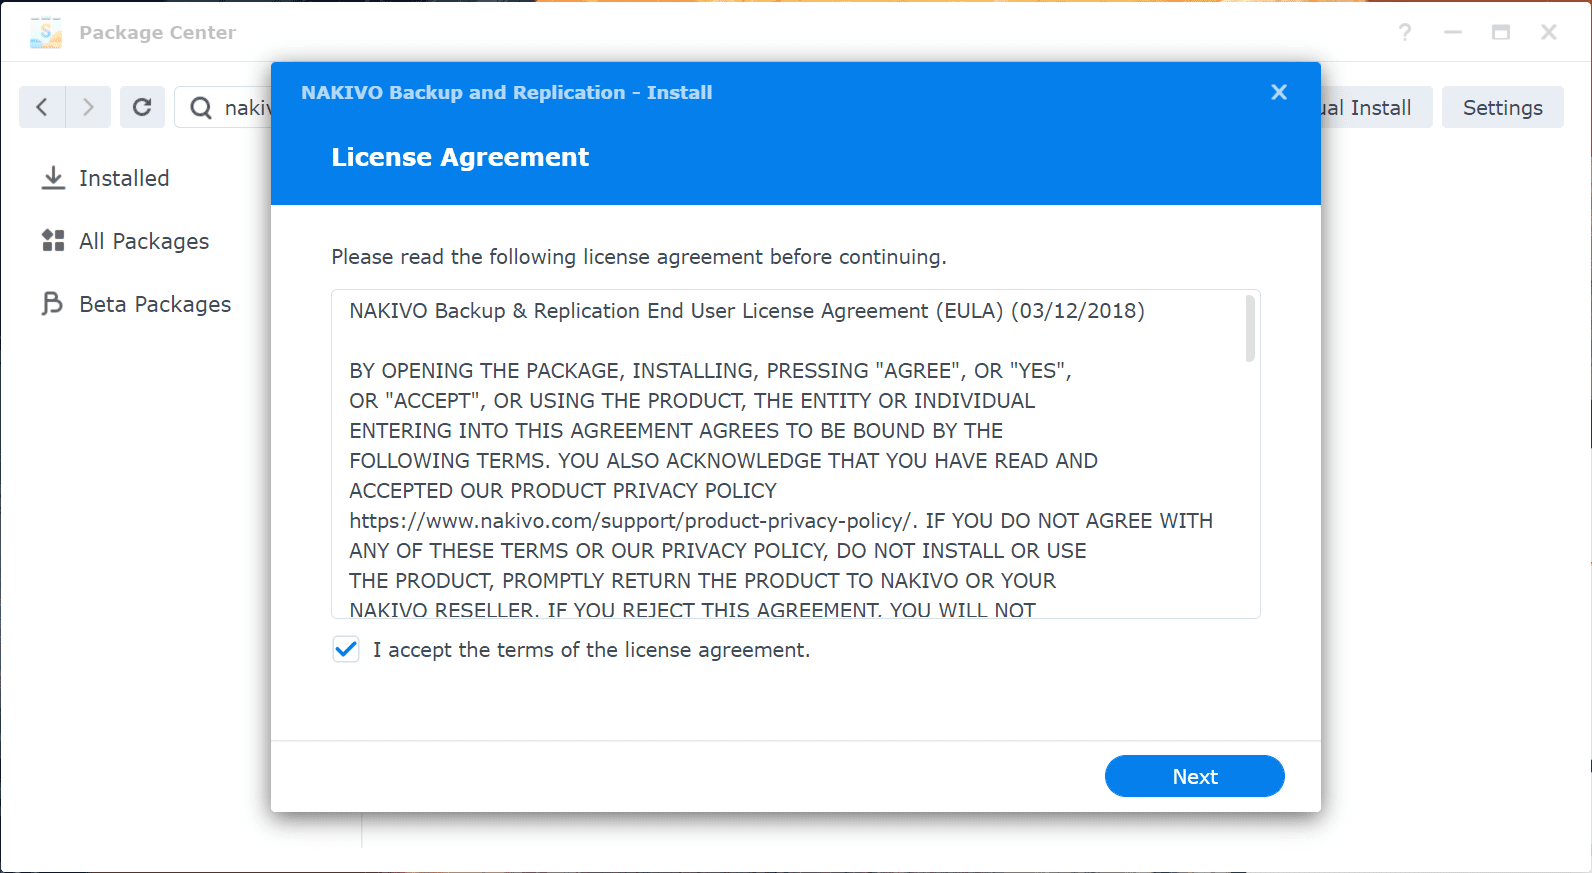 Accept the EULA for installing NAKIOV